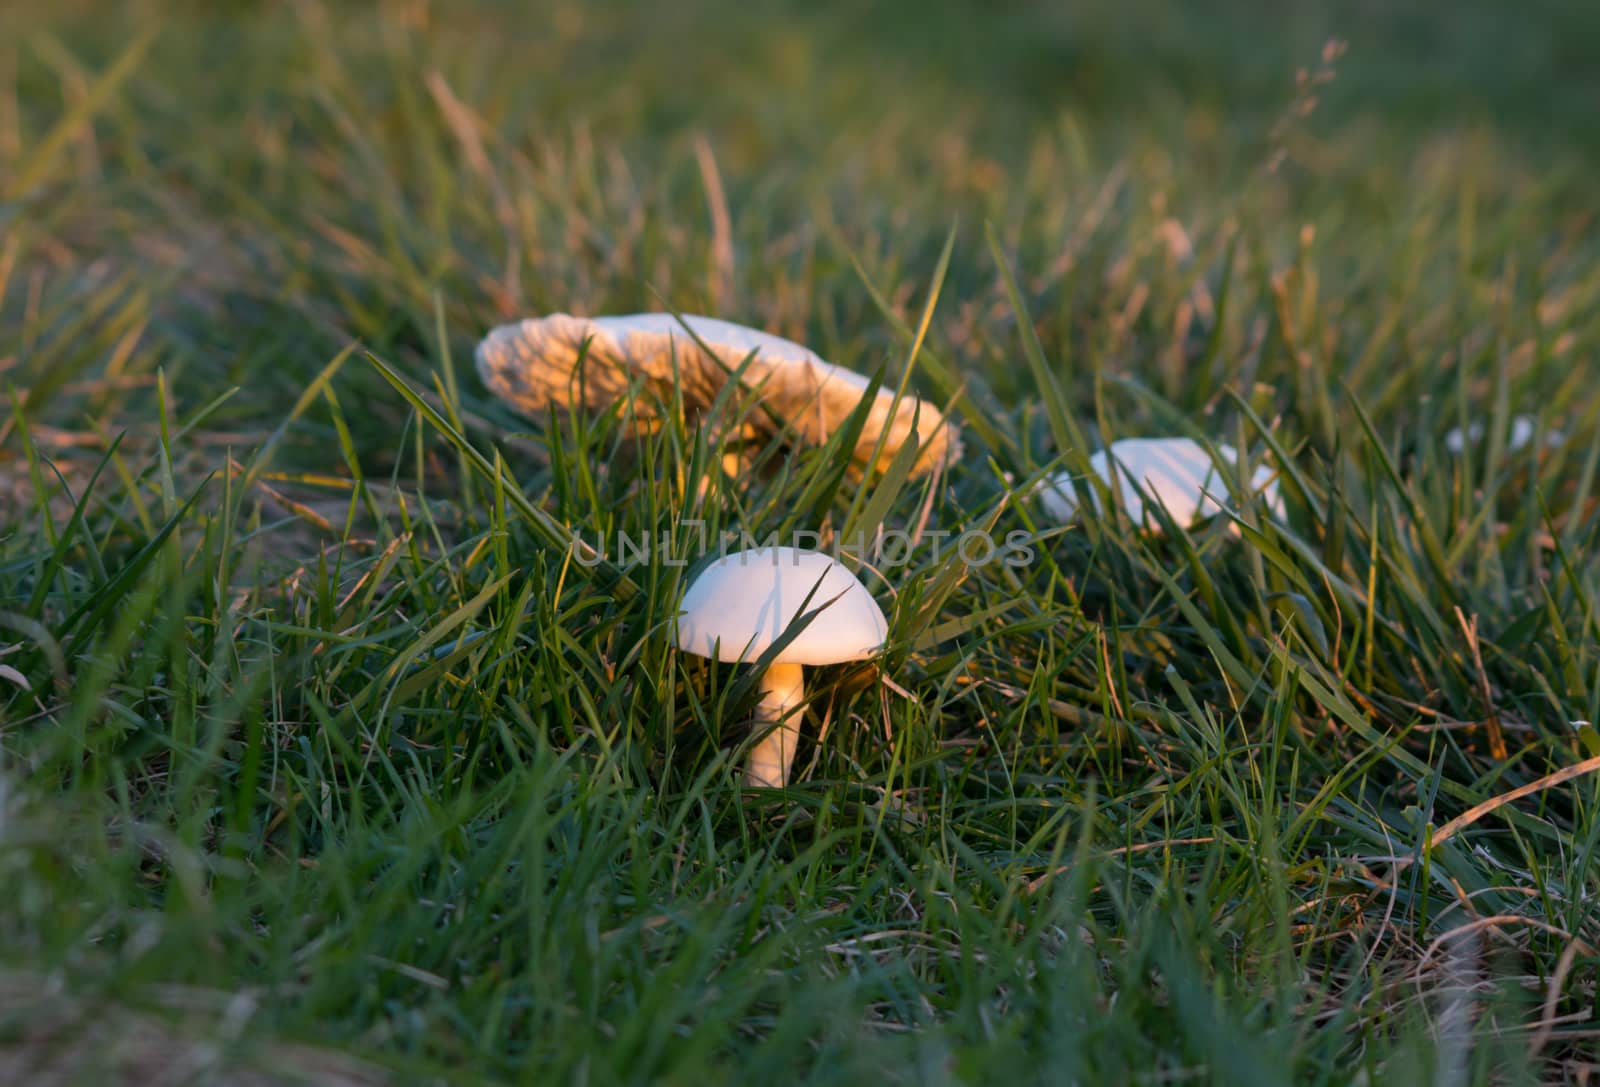 Mushrooms growing in the garden on the grass.
